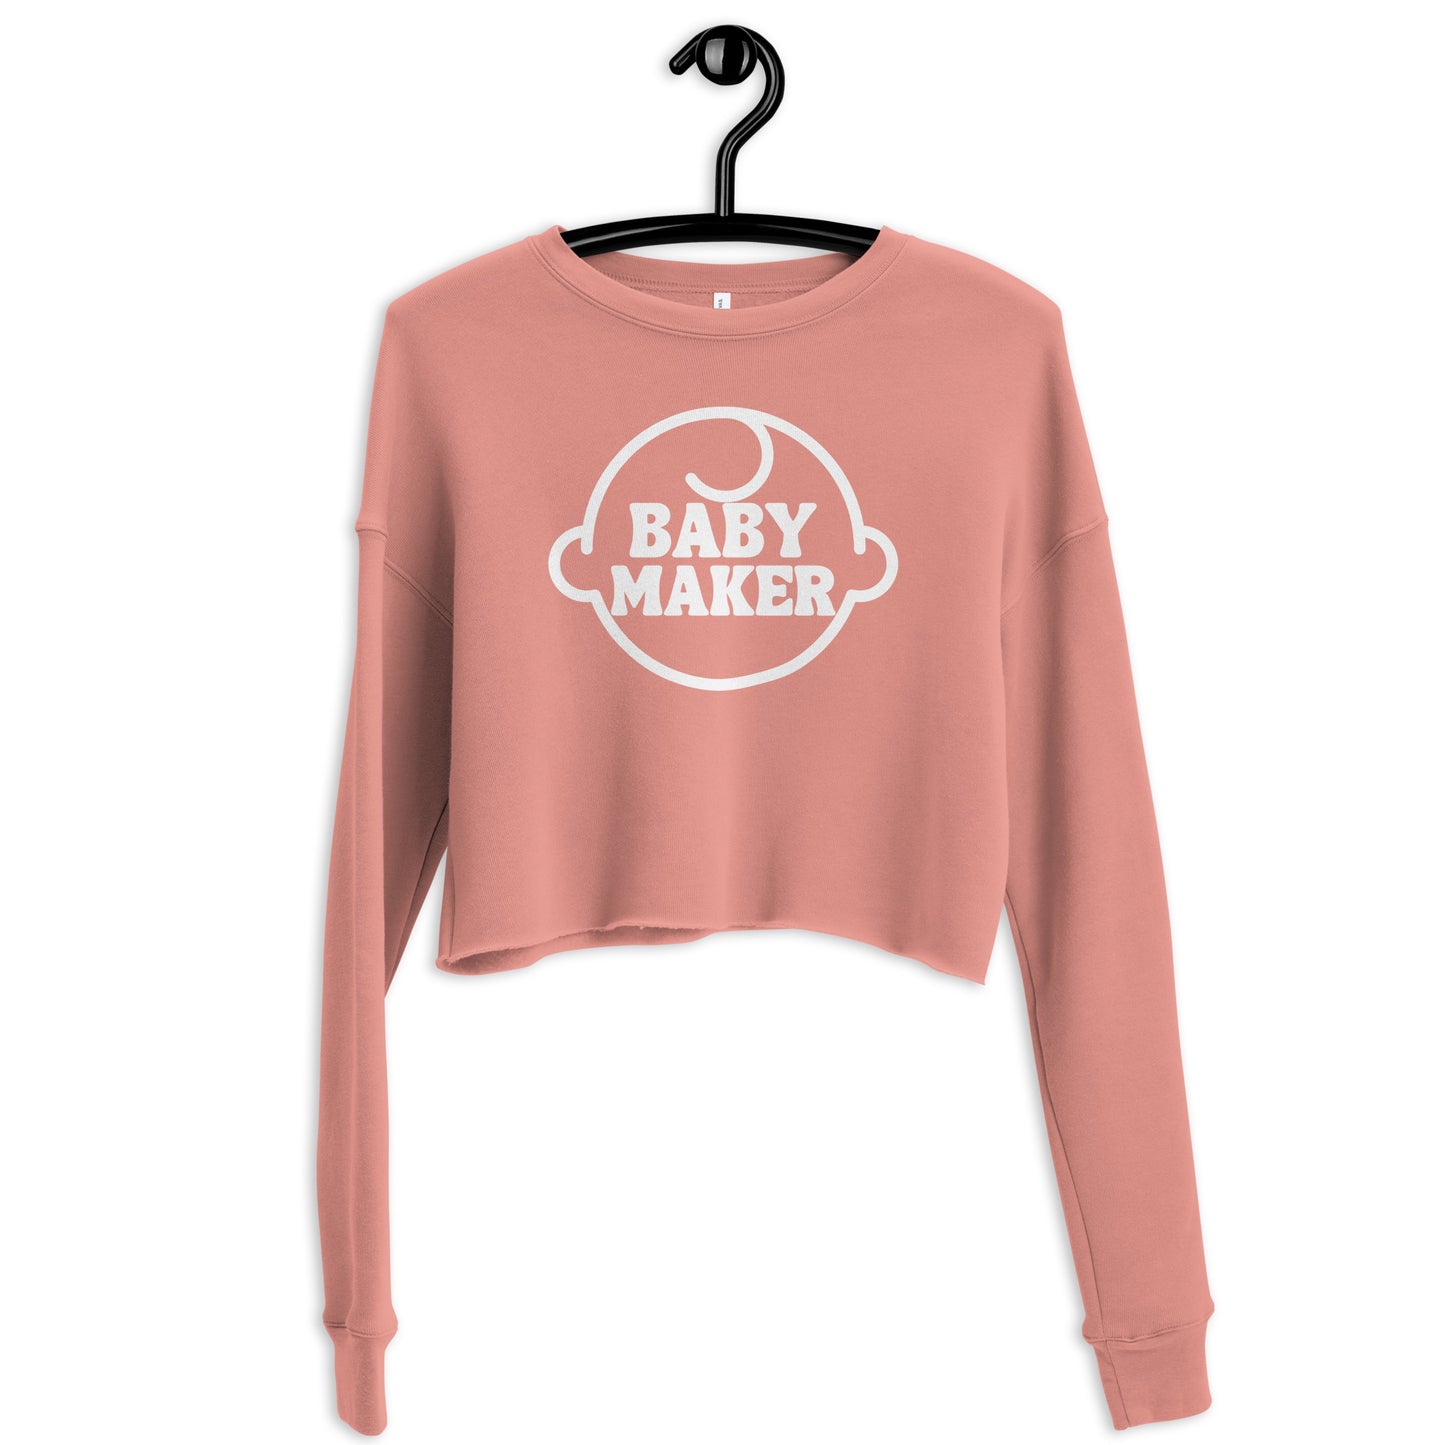 Baby Maker Cropped Sweatshirt in Mauve